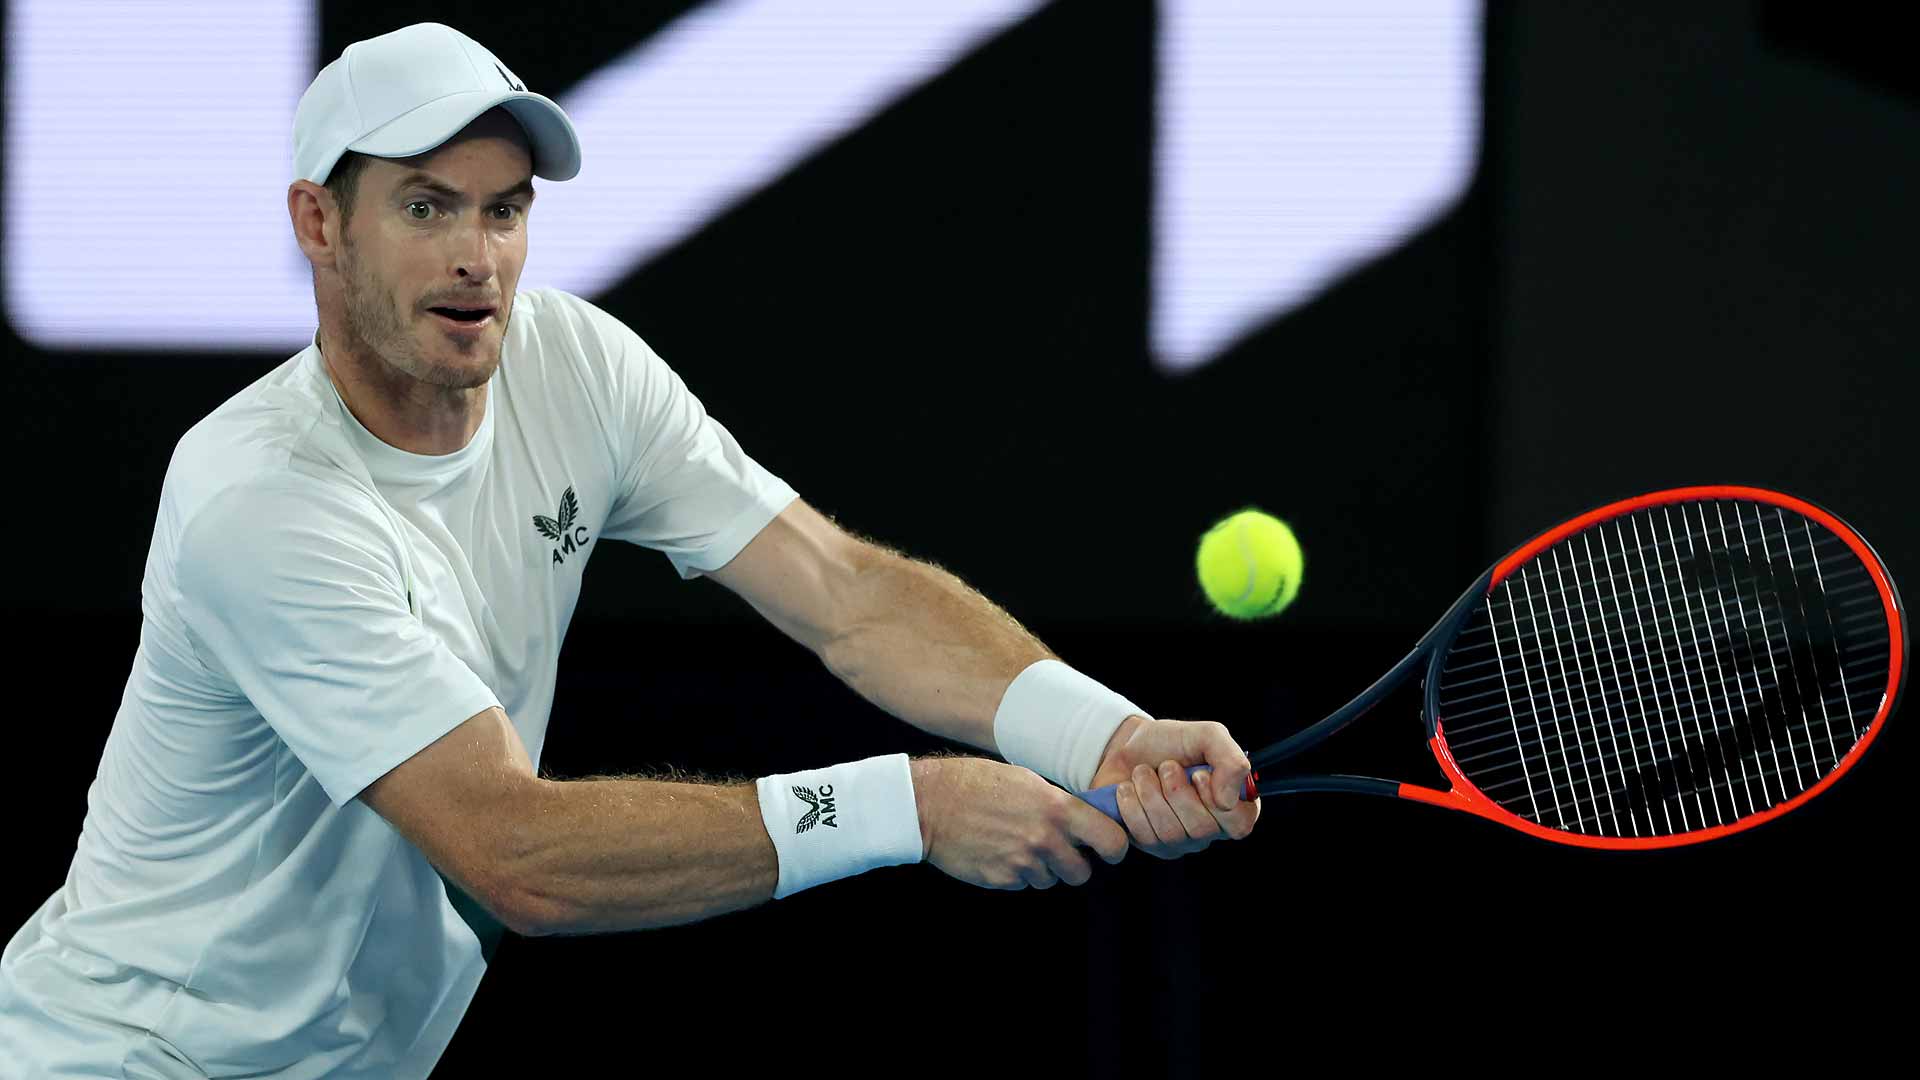 Andy Murray defeats Matteo Berrettini on Tuesday in Melbourne for his 50th Australian Open match win.